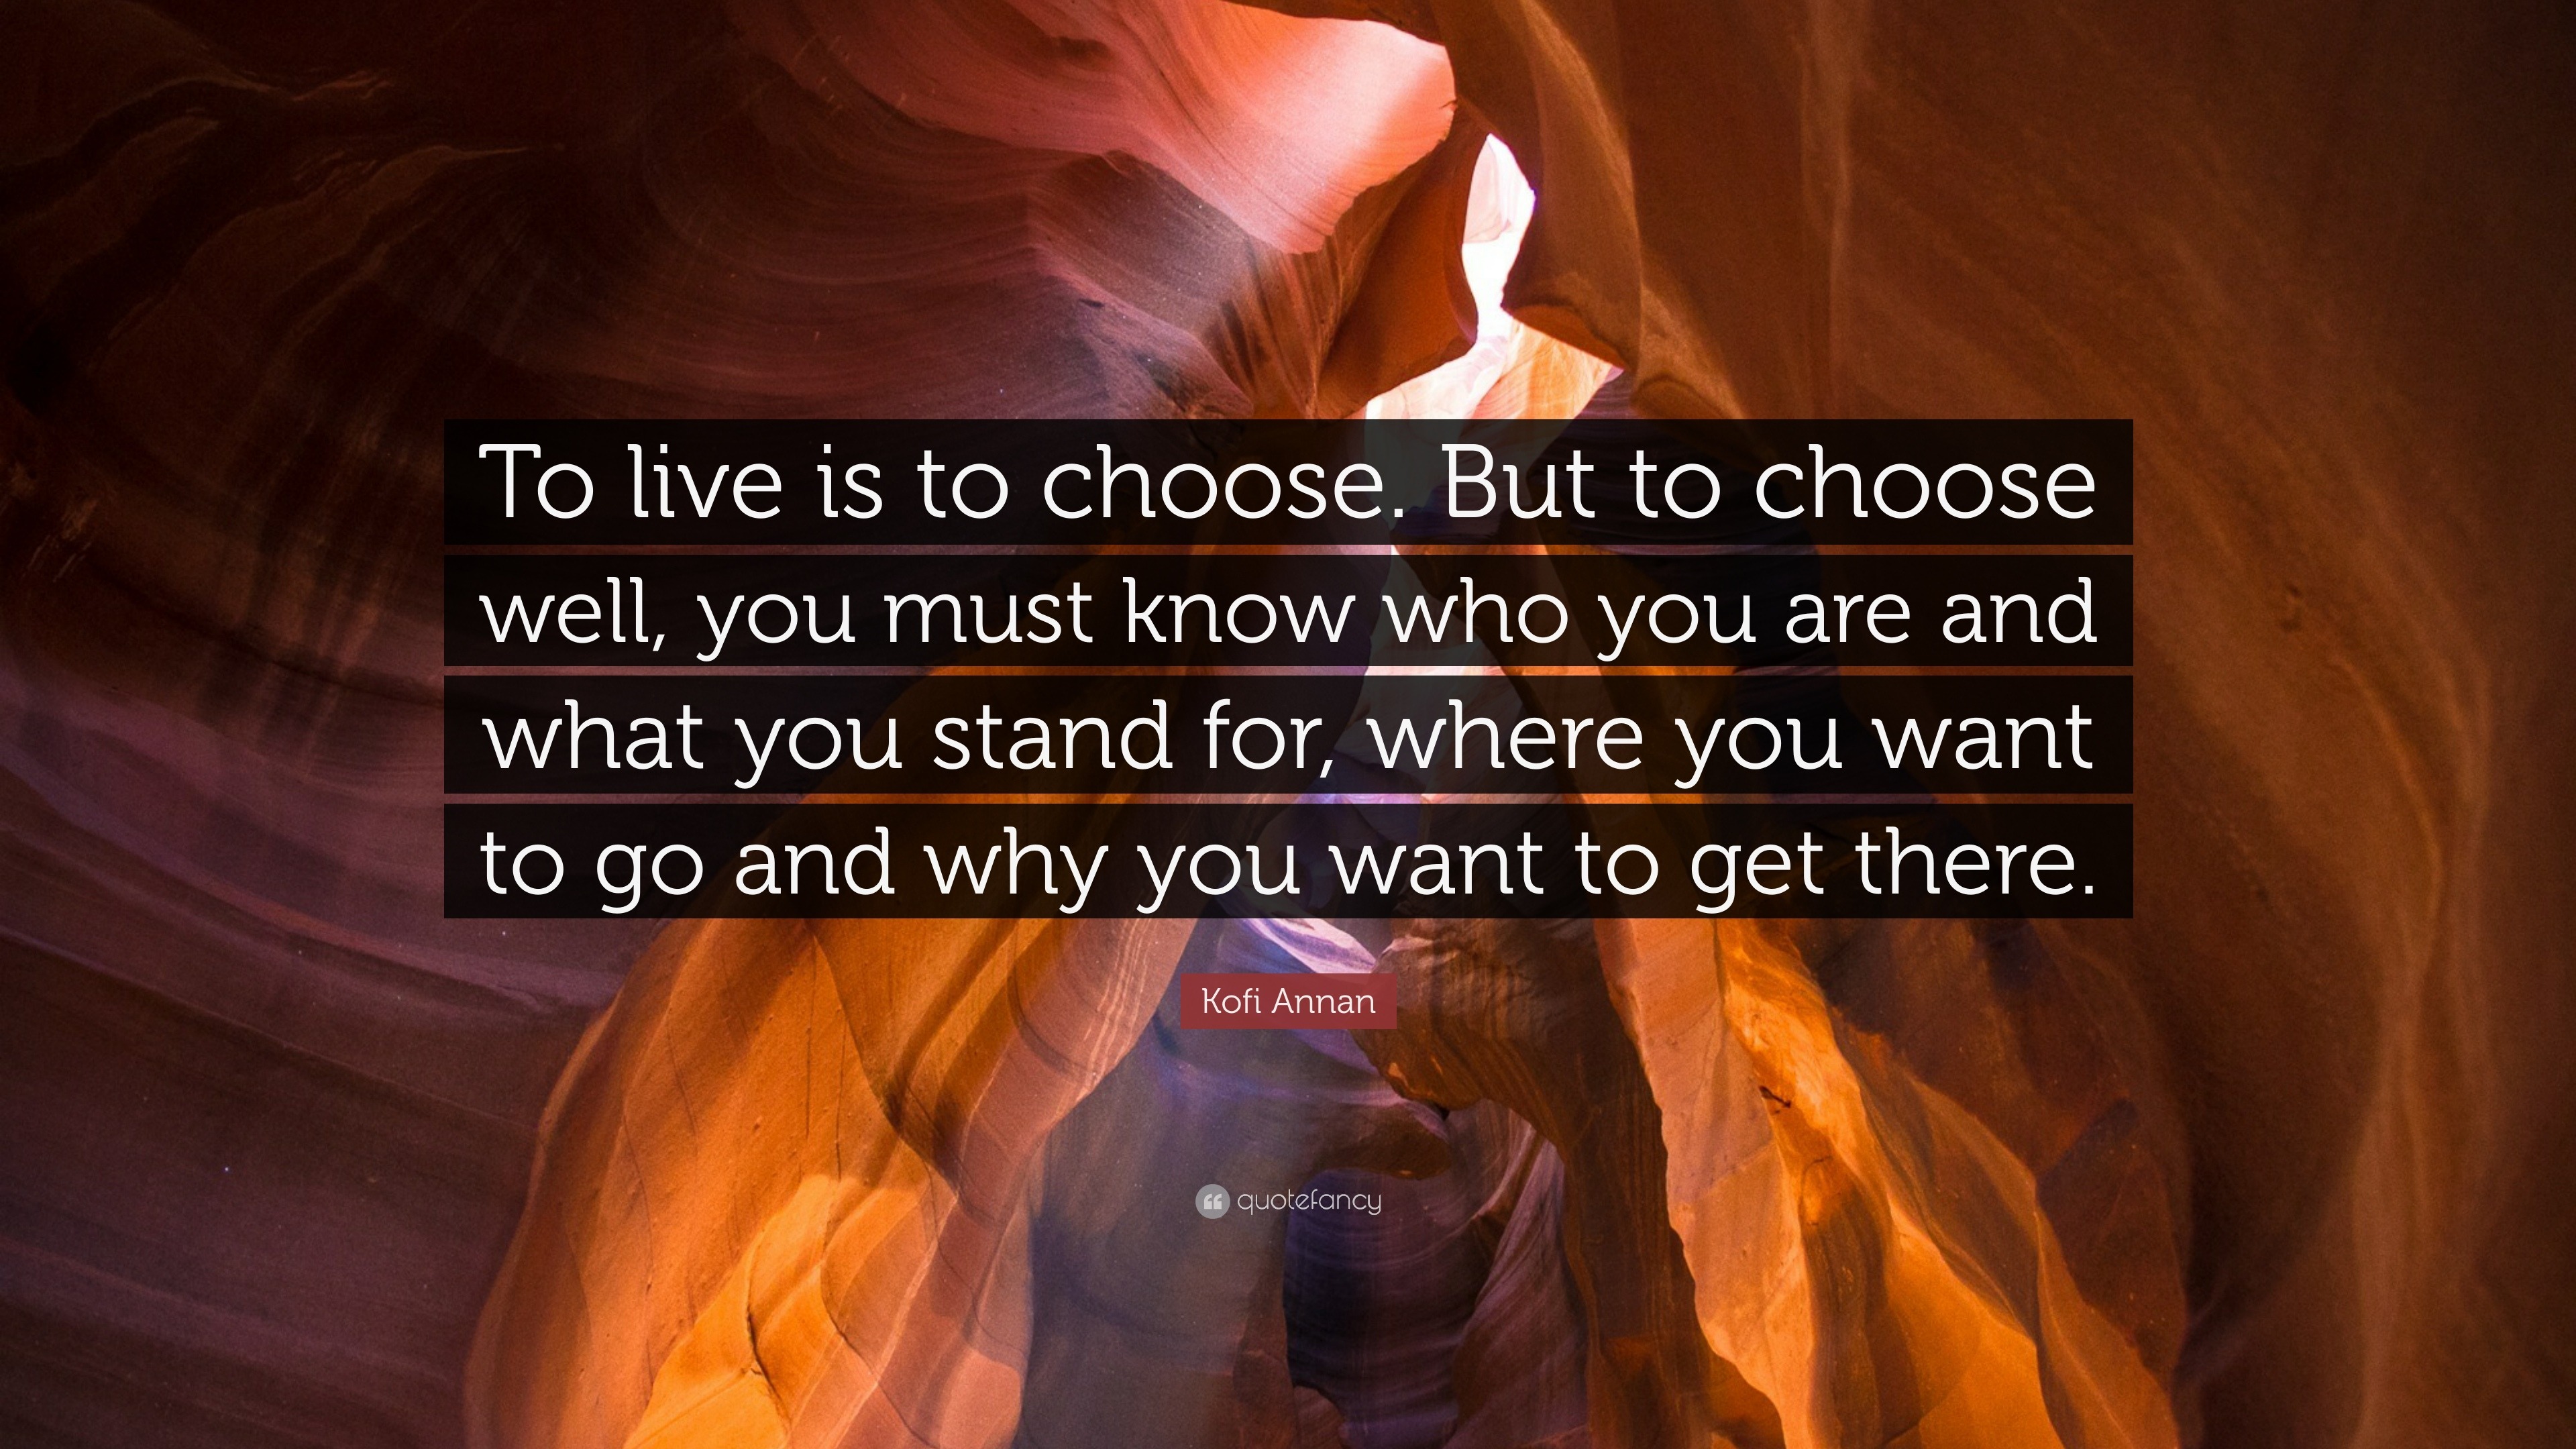 But to choose well, you must know who you are and what you stand for, where...